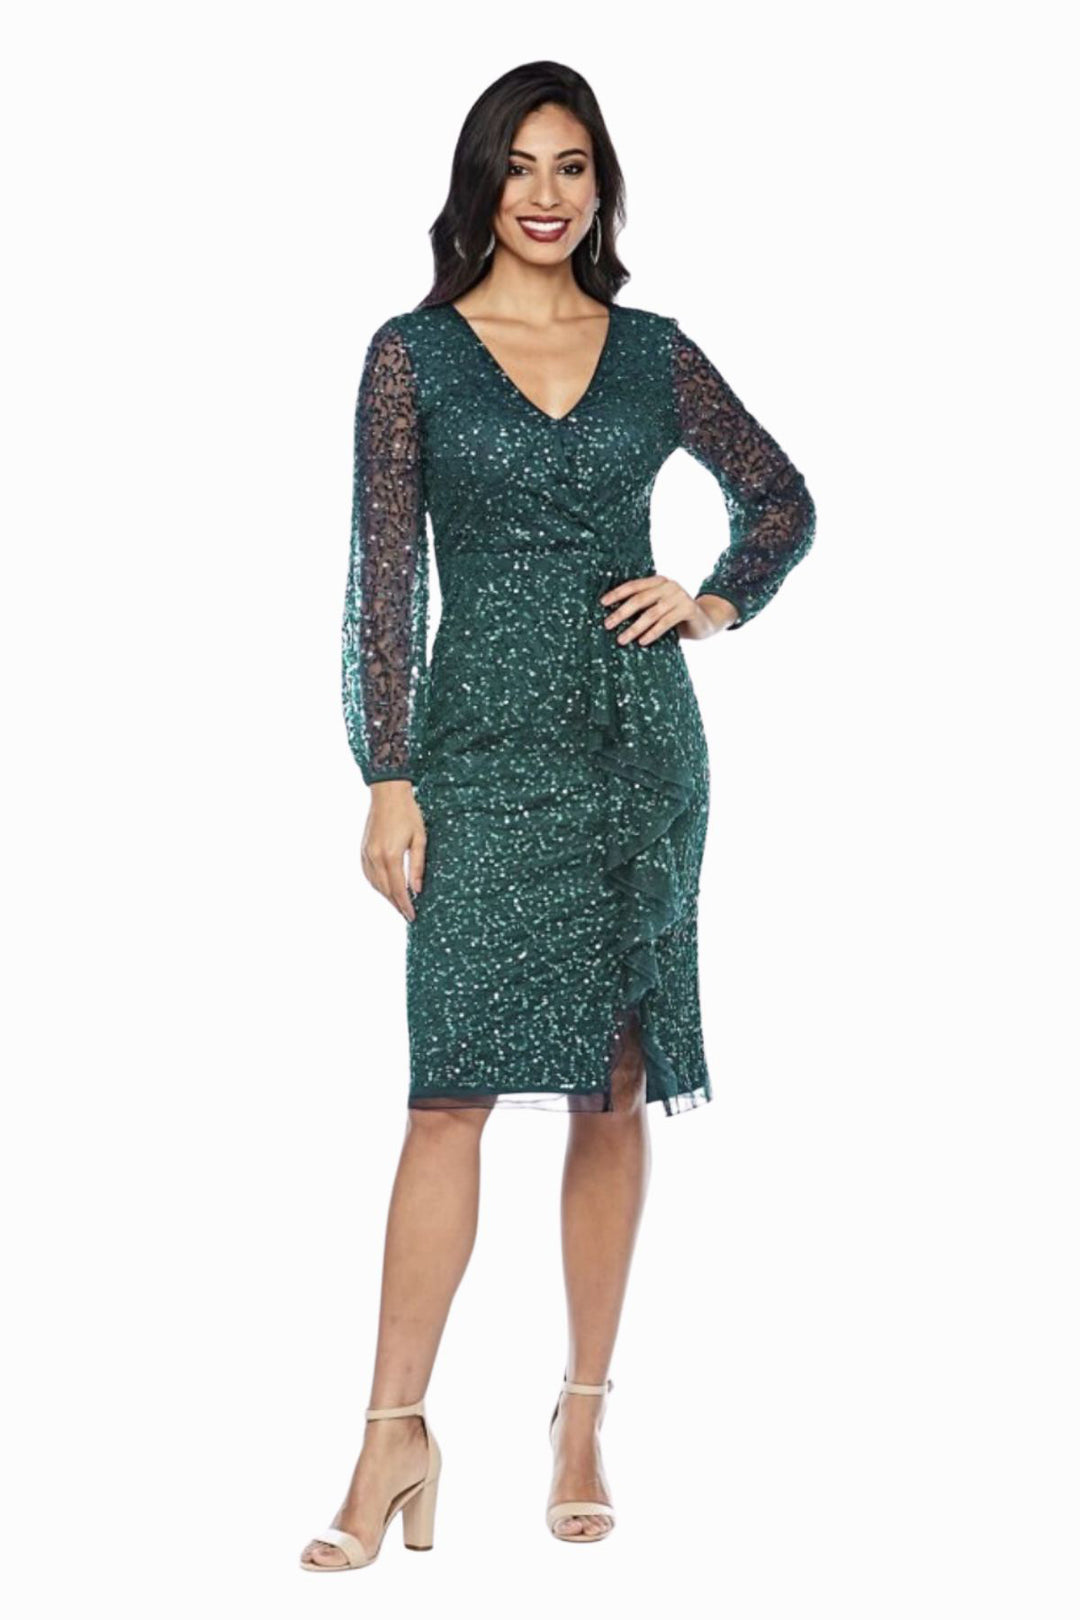 Woman wearing a green sequenced dress from Zaliea Australia with long sleeves and tan chunky heels from Pizazz Boutique Nelson Bay dress shops 